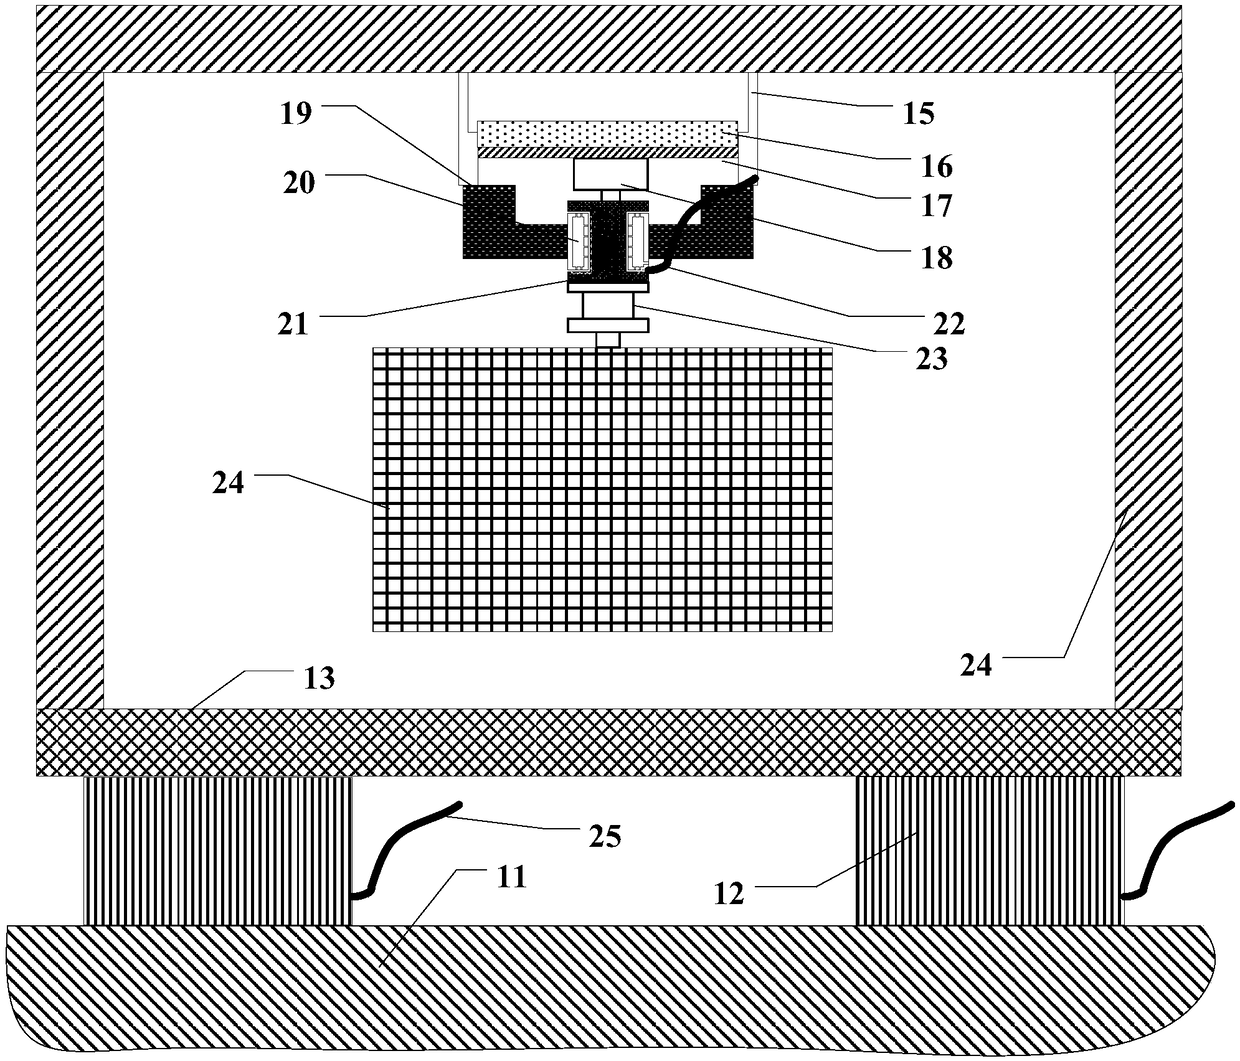 A multi-level micro-vibration system test method and system